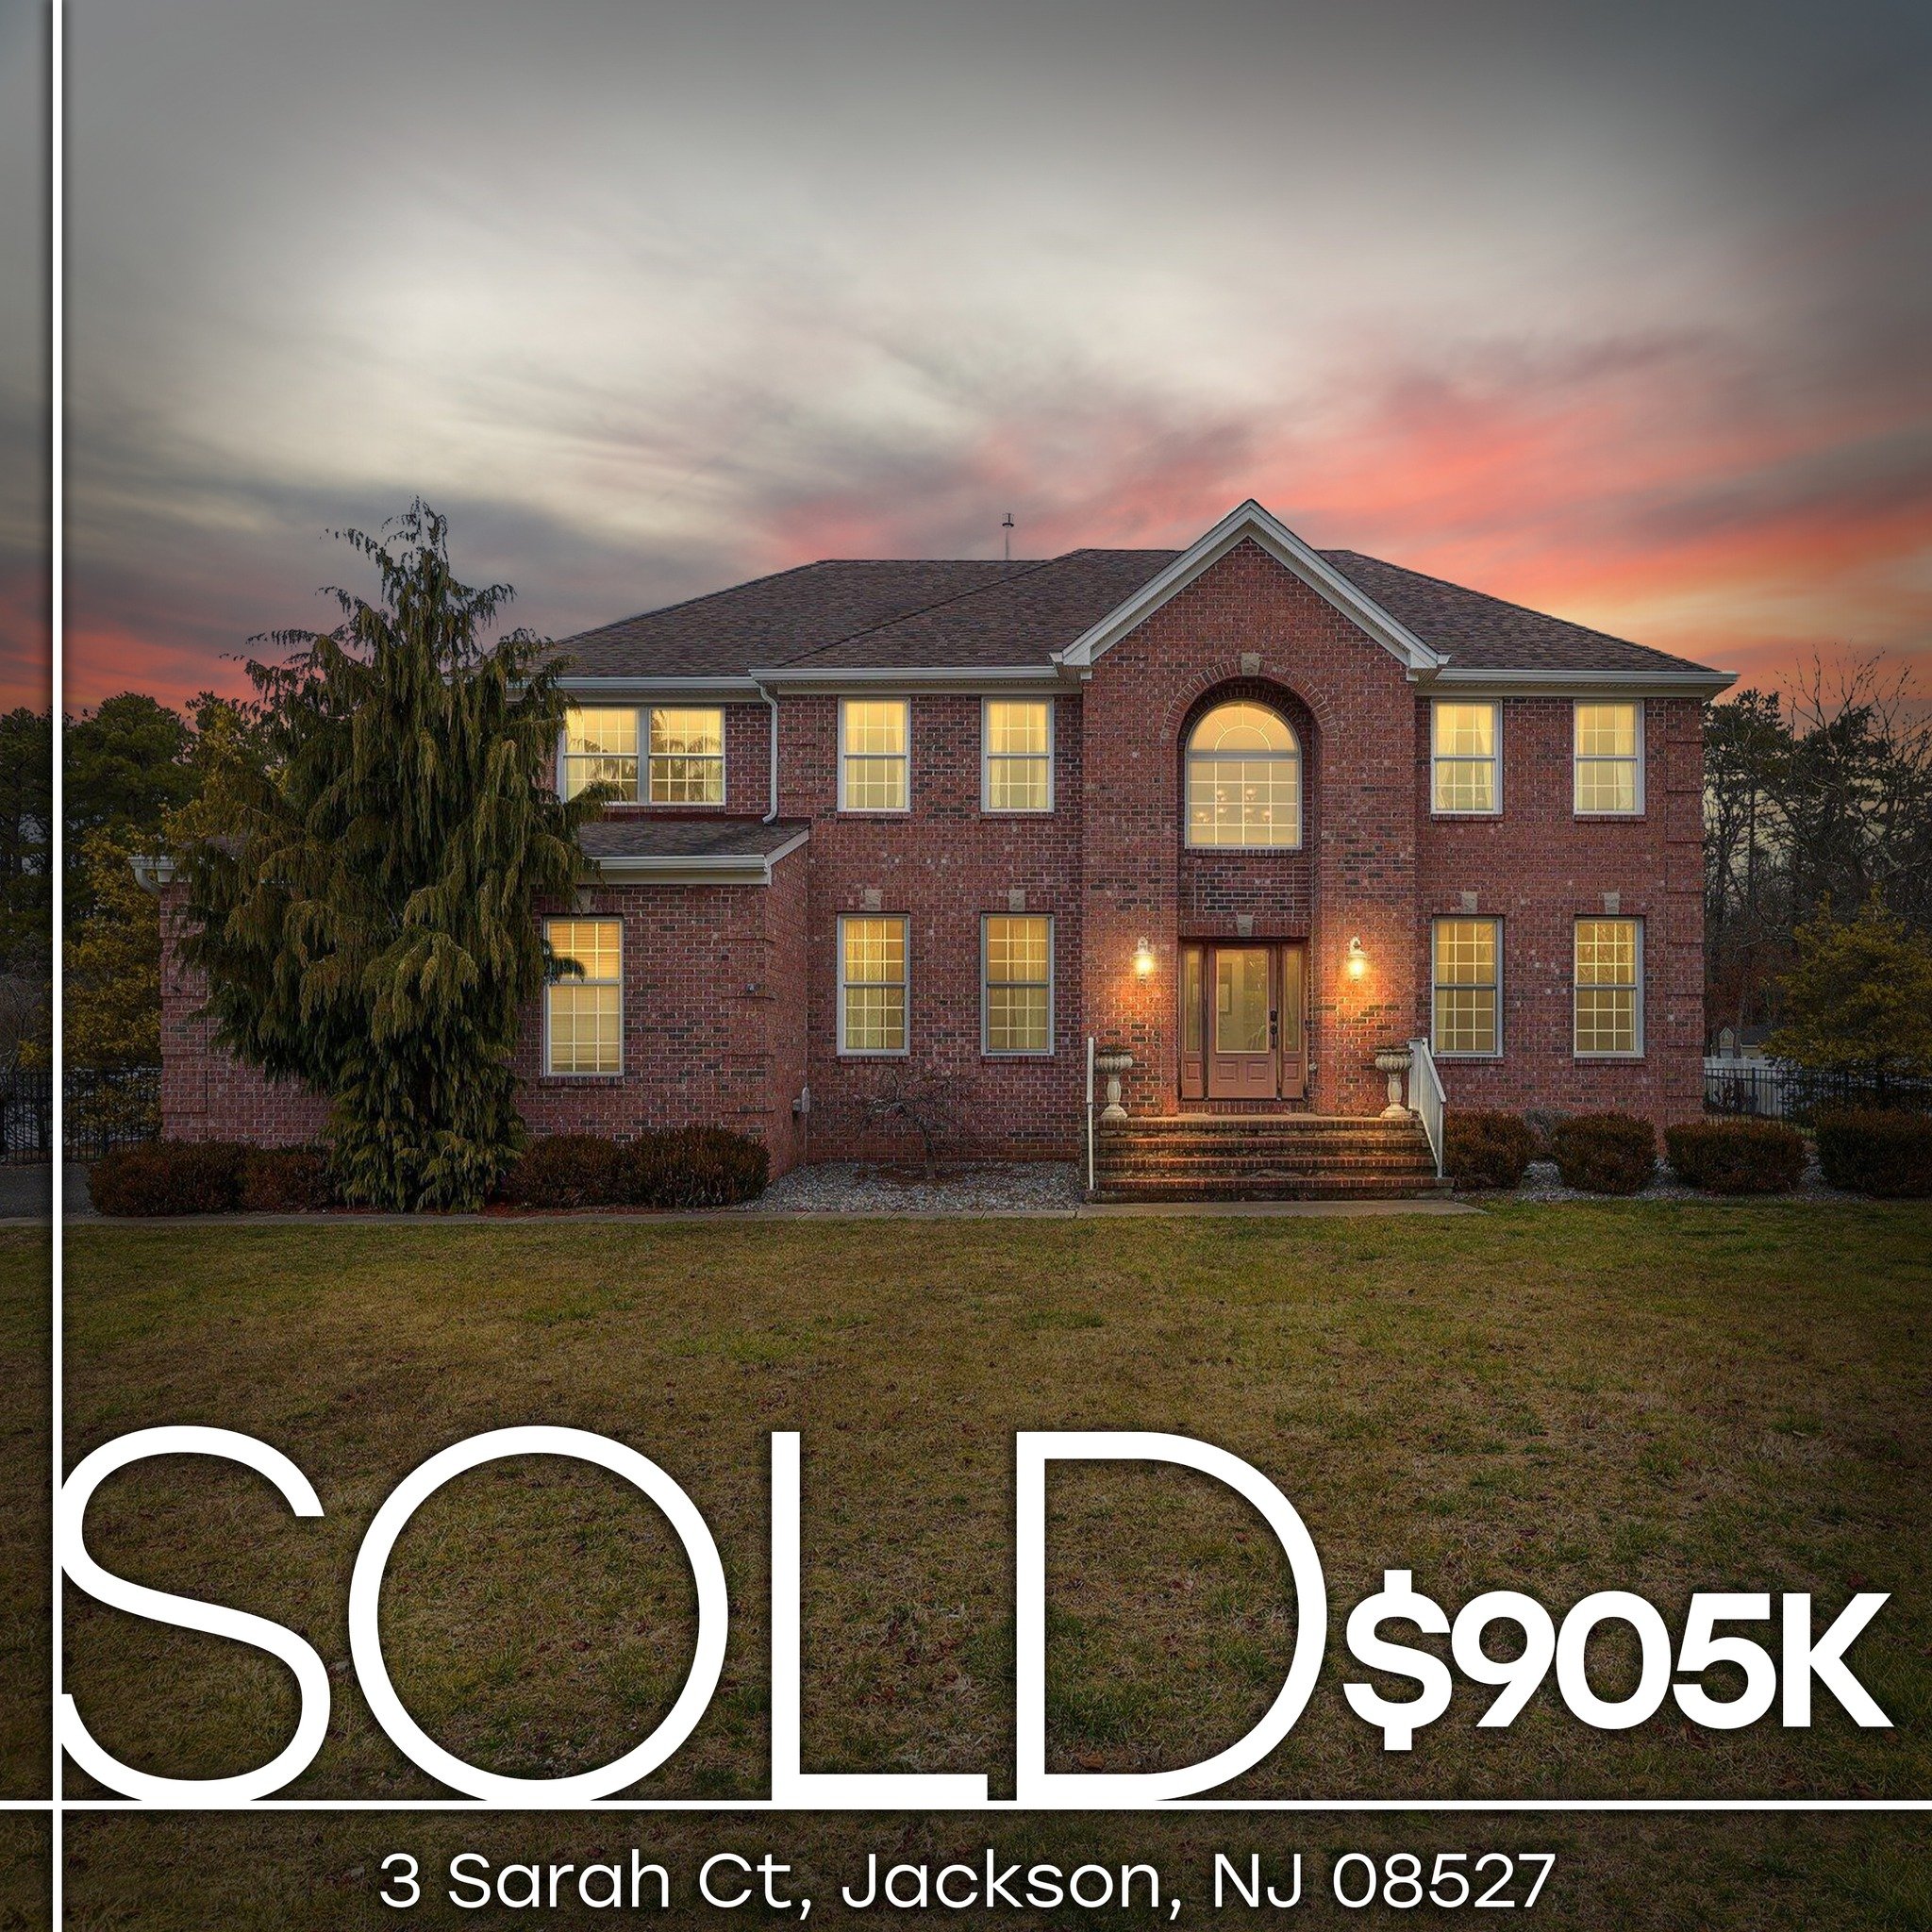 💥JUST SOLD!💥
📍3 Sarah Ct, Jackson, NJ 08527
4 Bed | 2.5 Bath | 2,960Ft.&sup2;

This beautiful colonial in the Forest Walk community of Jackson is officially Sold. With the grand foyer, high ceilings, fireplace, breakfast bar, wood burning fireplac